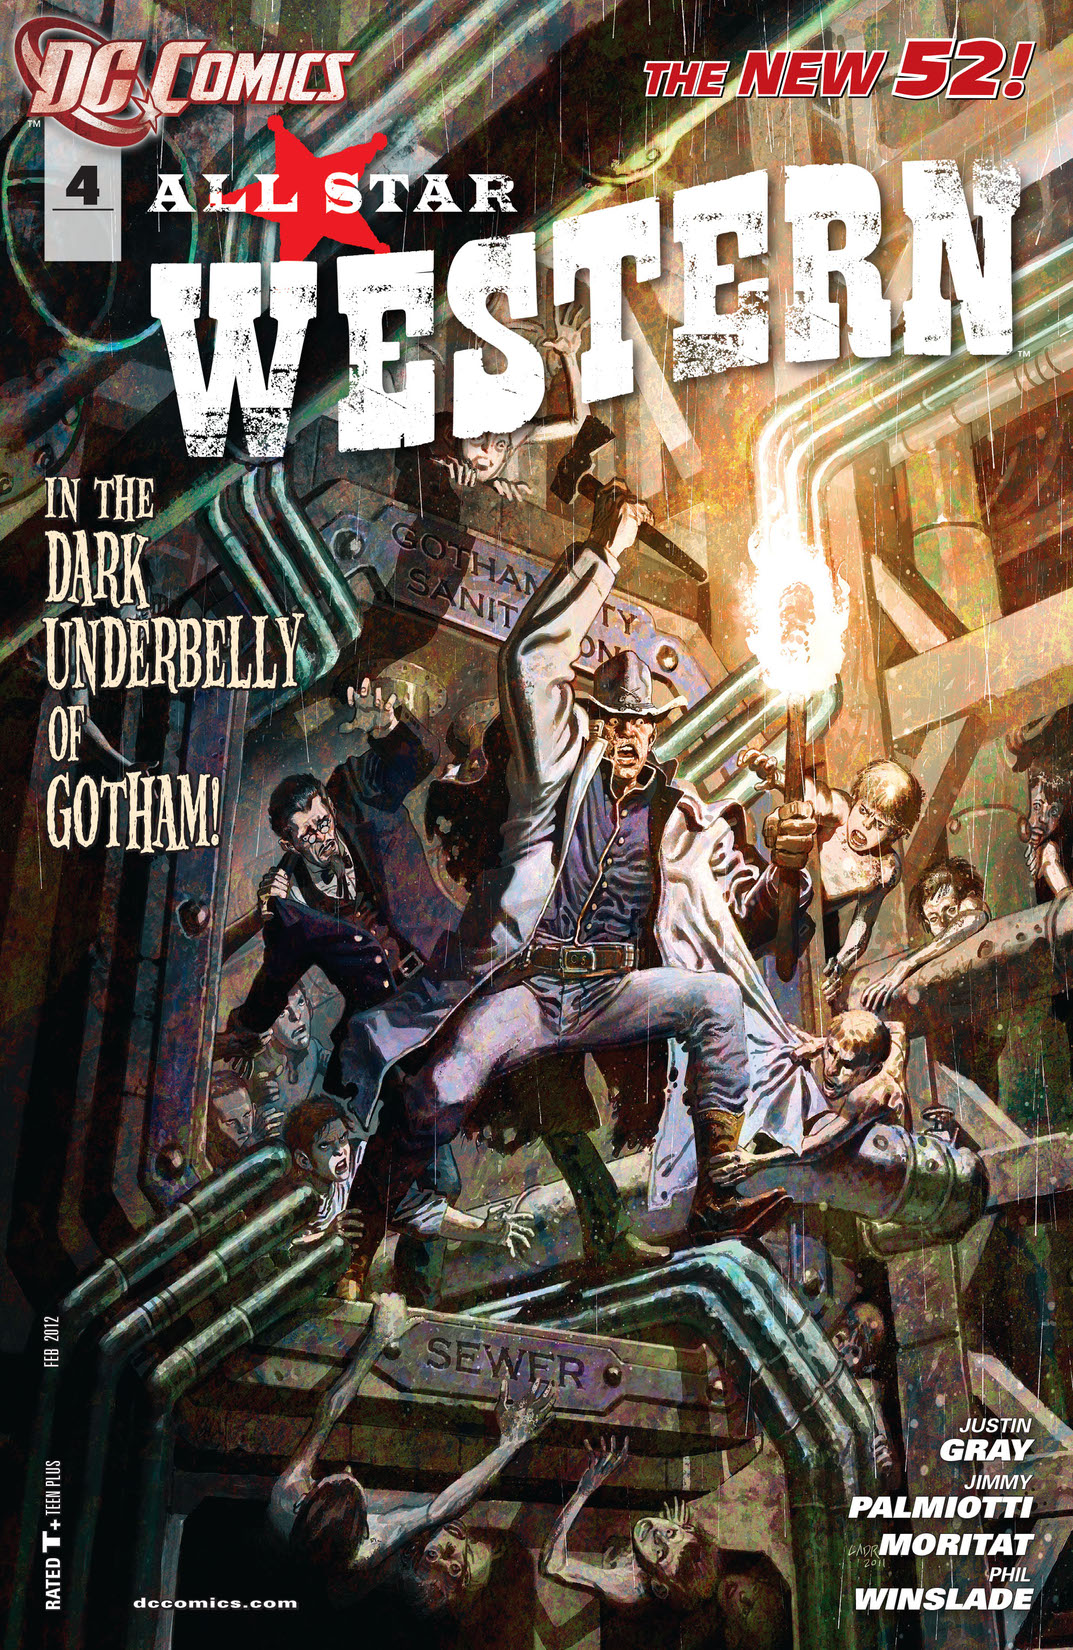 All Star Western #4 preview images